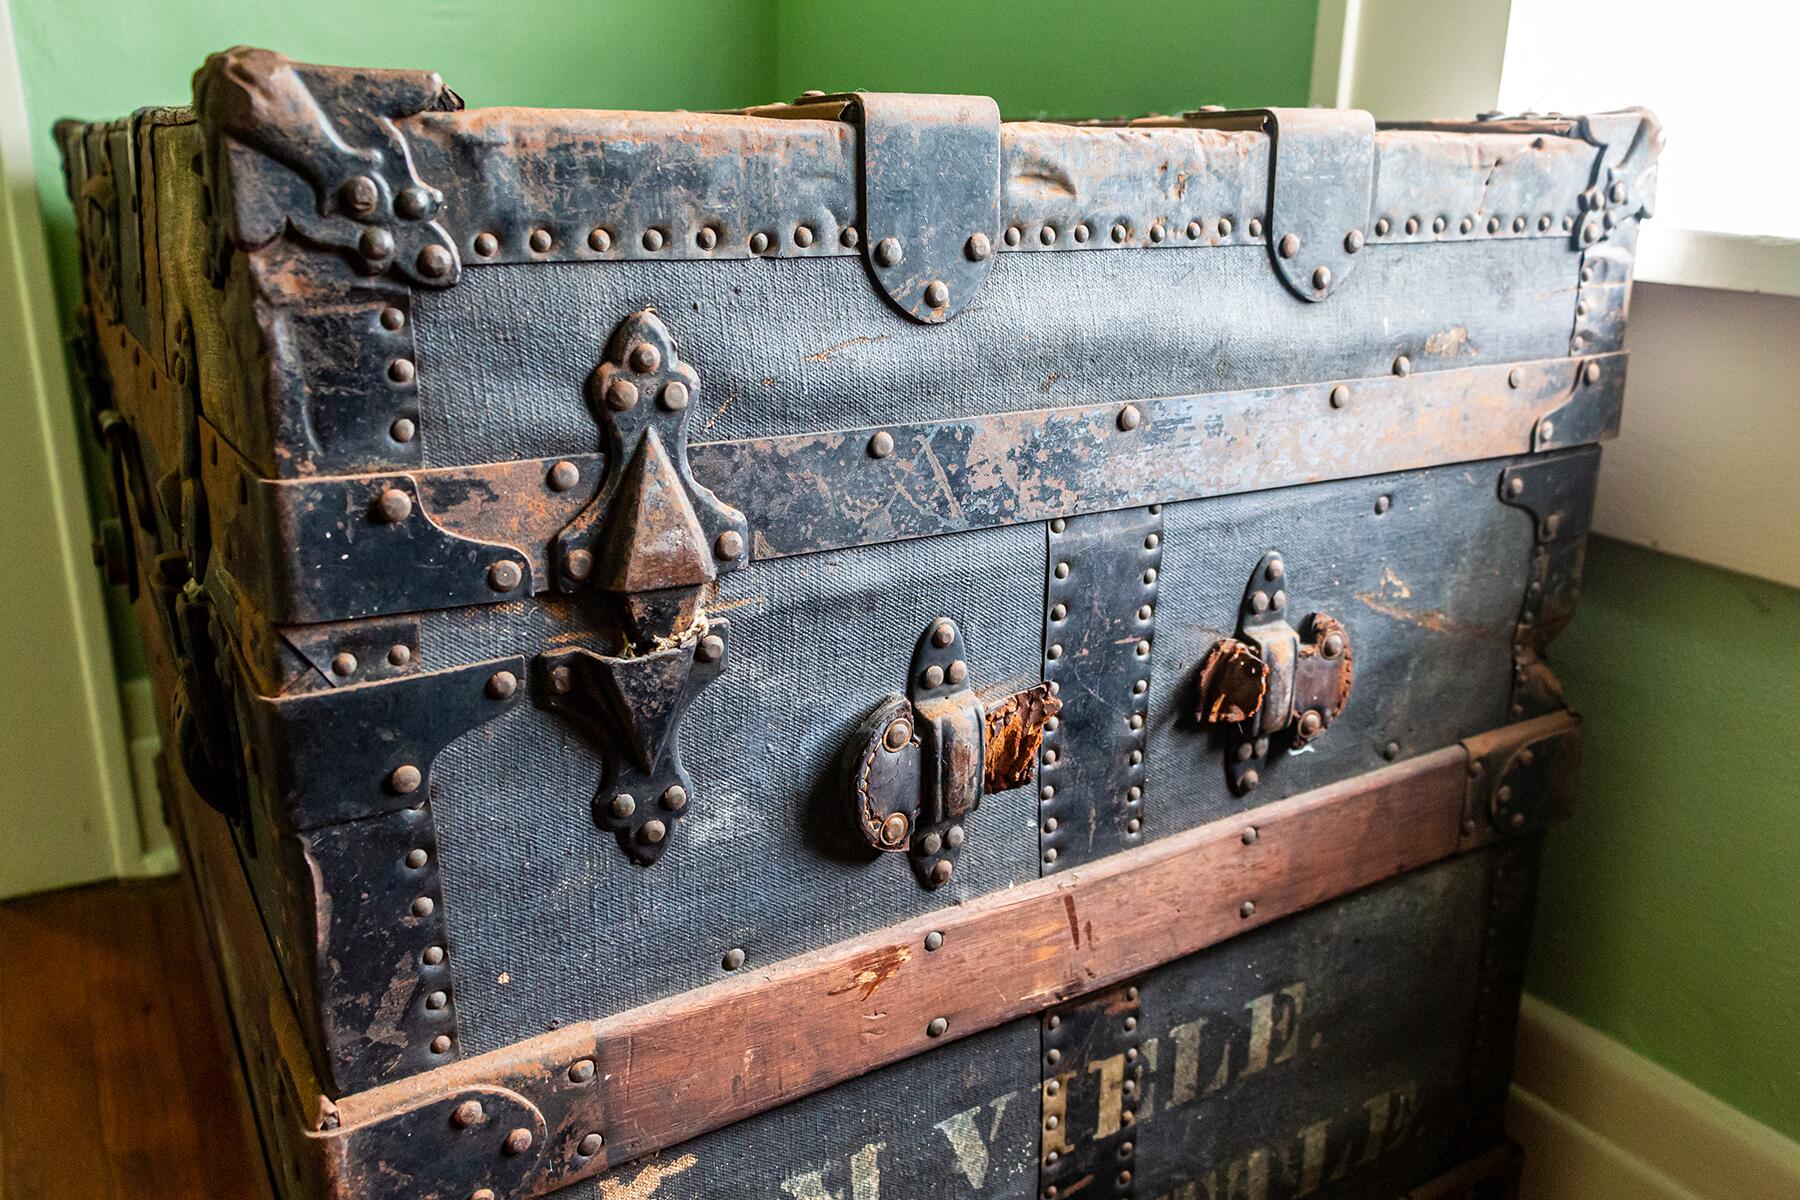 The history of luggage